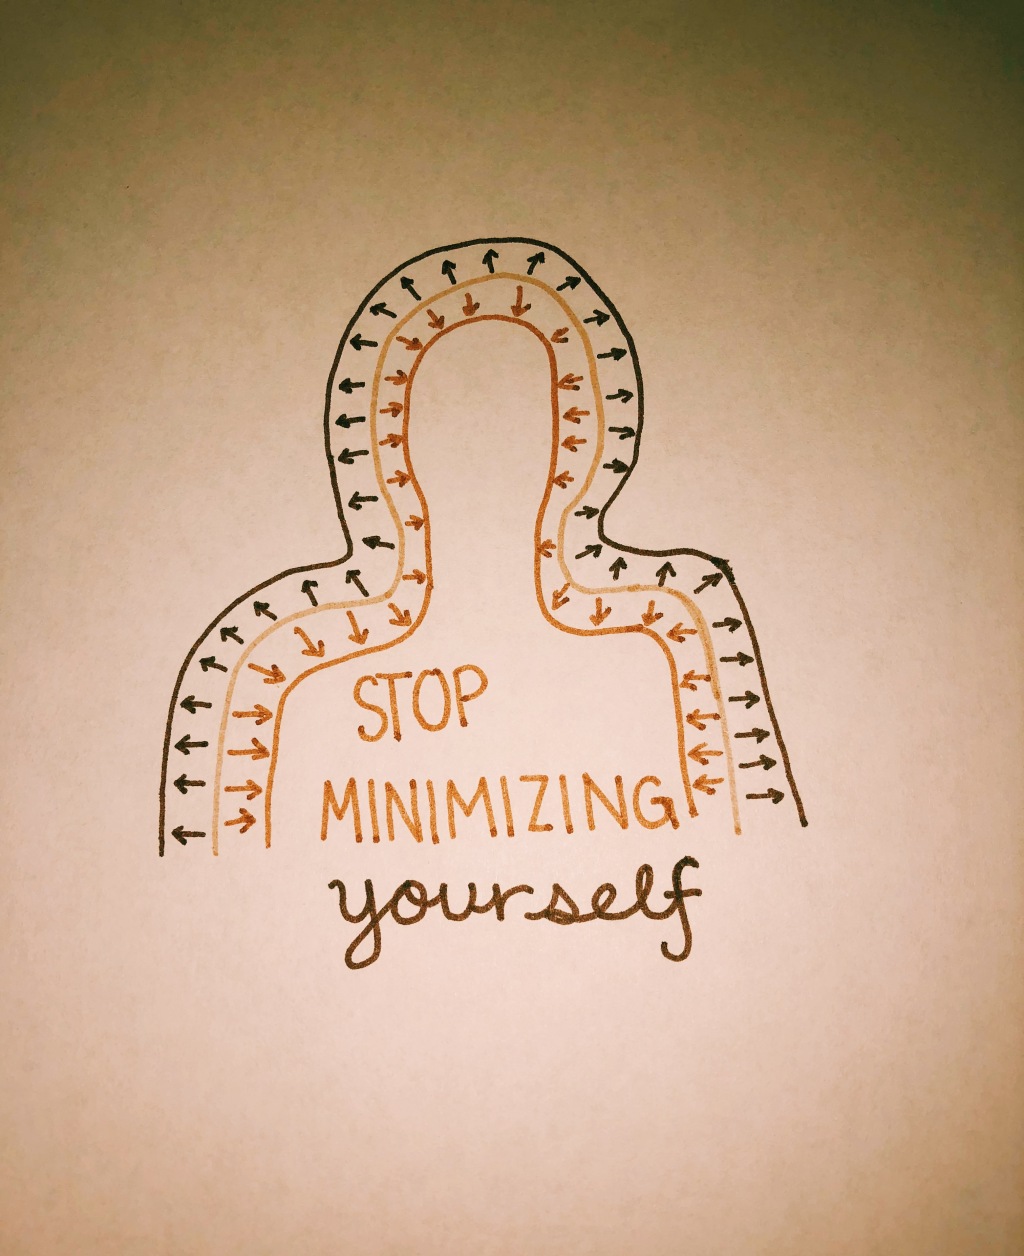 Self-Minimization Is Common But Unhealthy